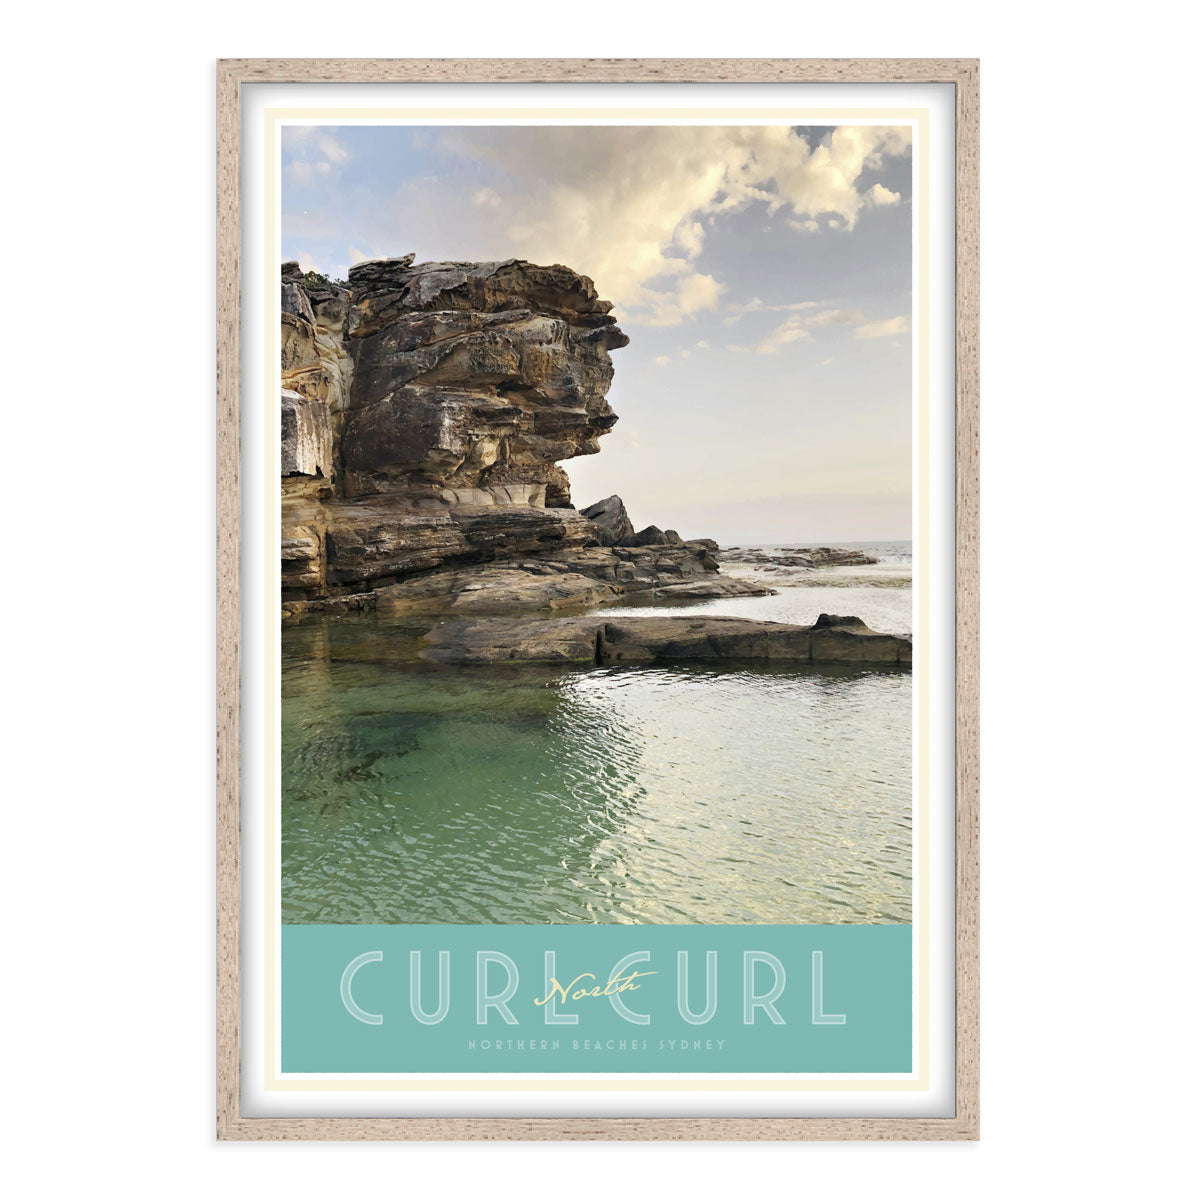 North Curl Curl Pool vintage travel style oak framed poster by places we luv